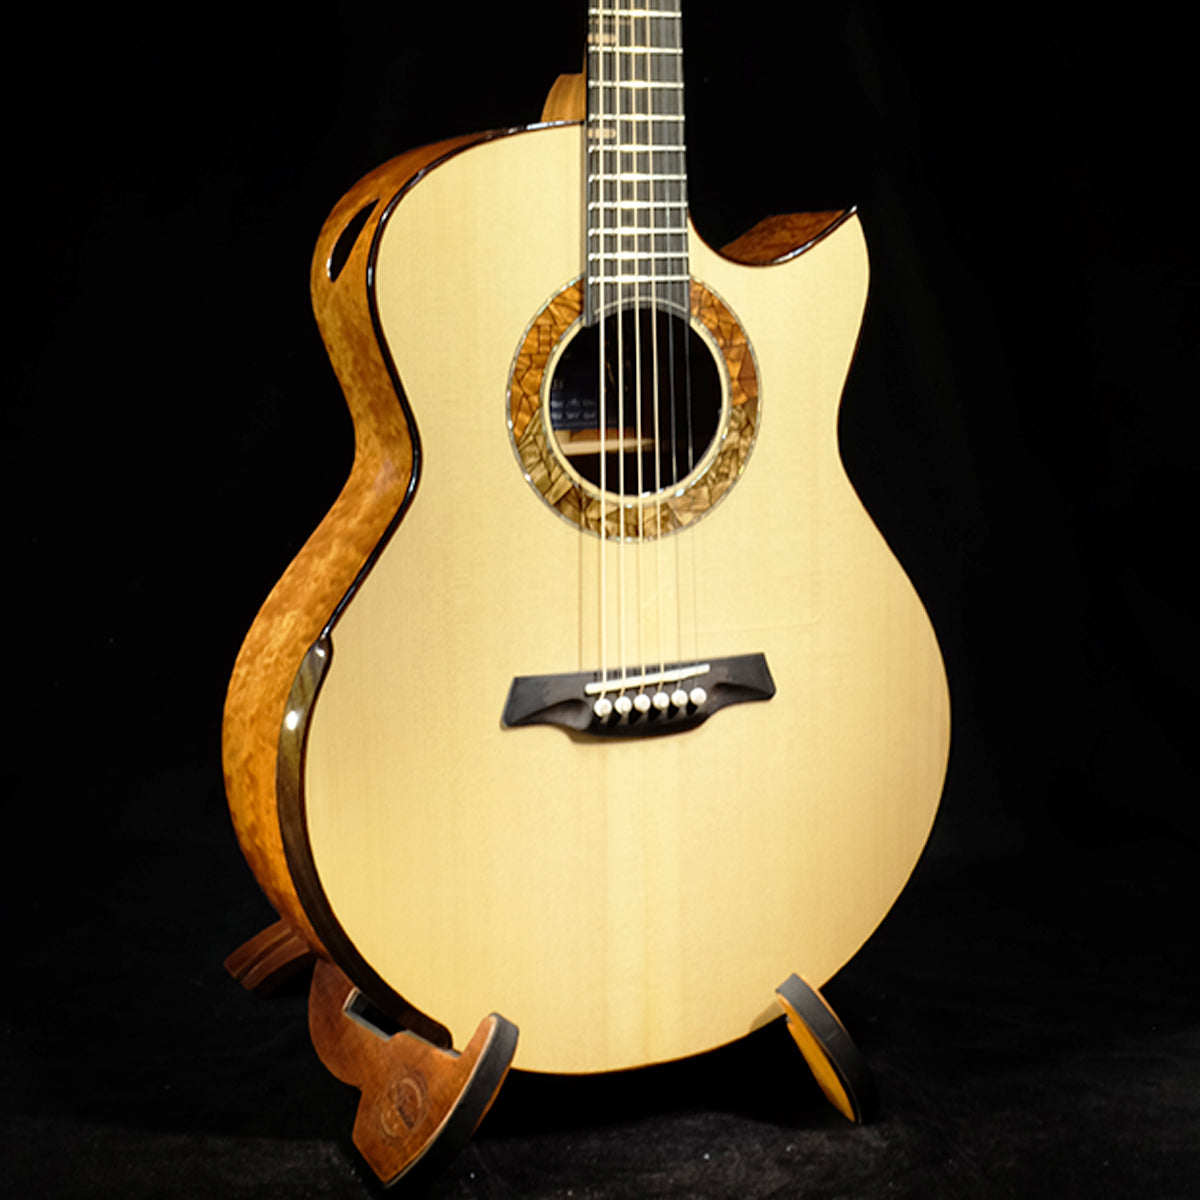 Blue Label SJ Adirondack Spruce with Quilted Sapele | #35